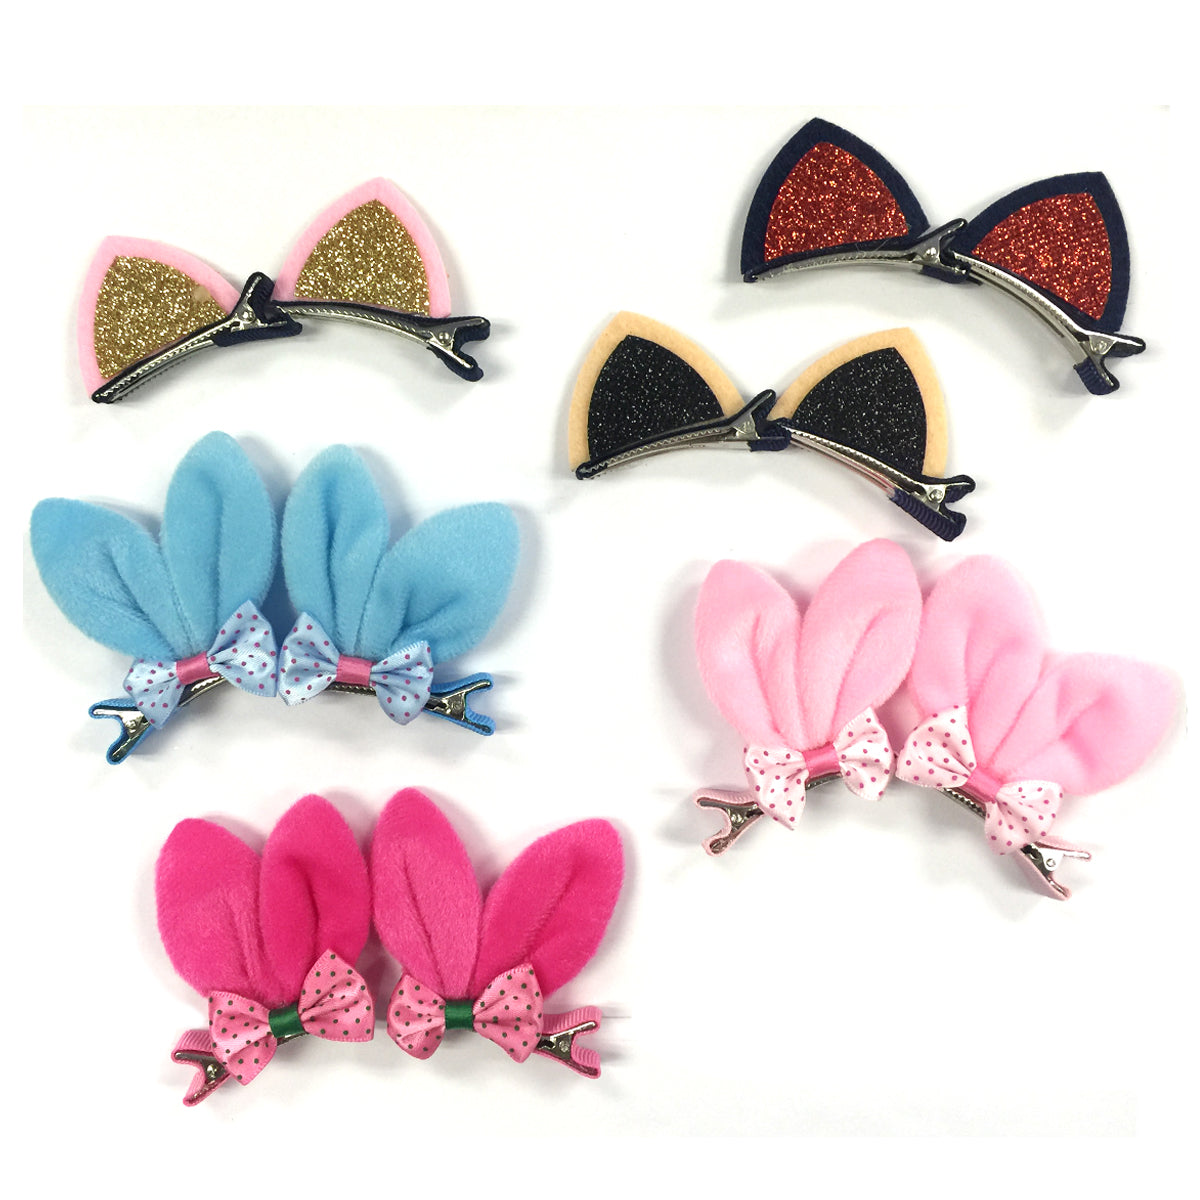 Wrapables Rabbit and Cat Ears with Bow Alligator Hair Clips (Set of 12)